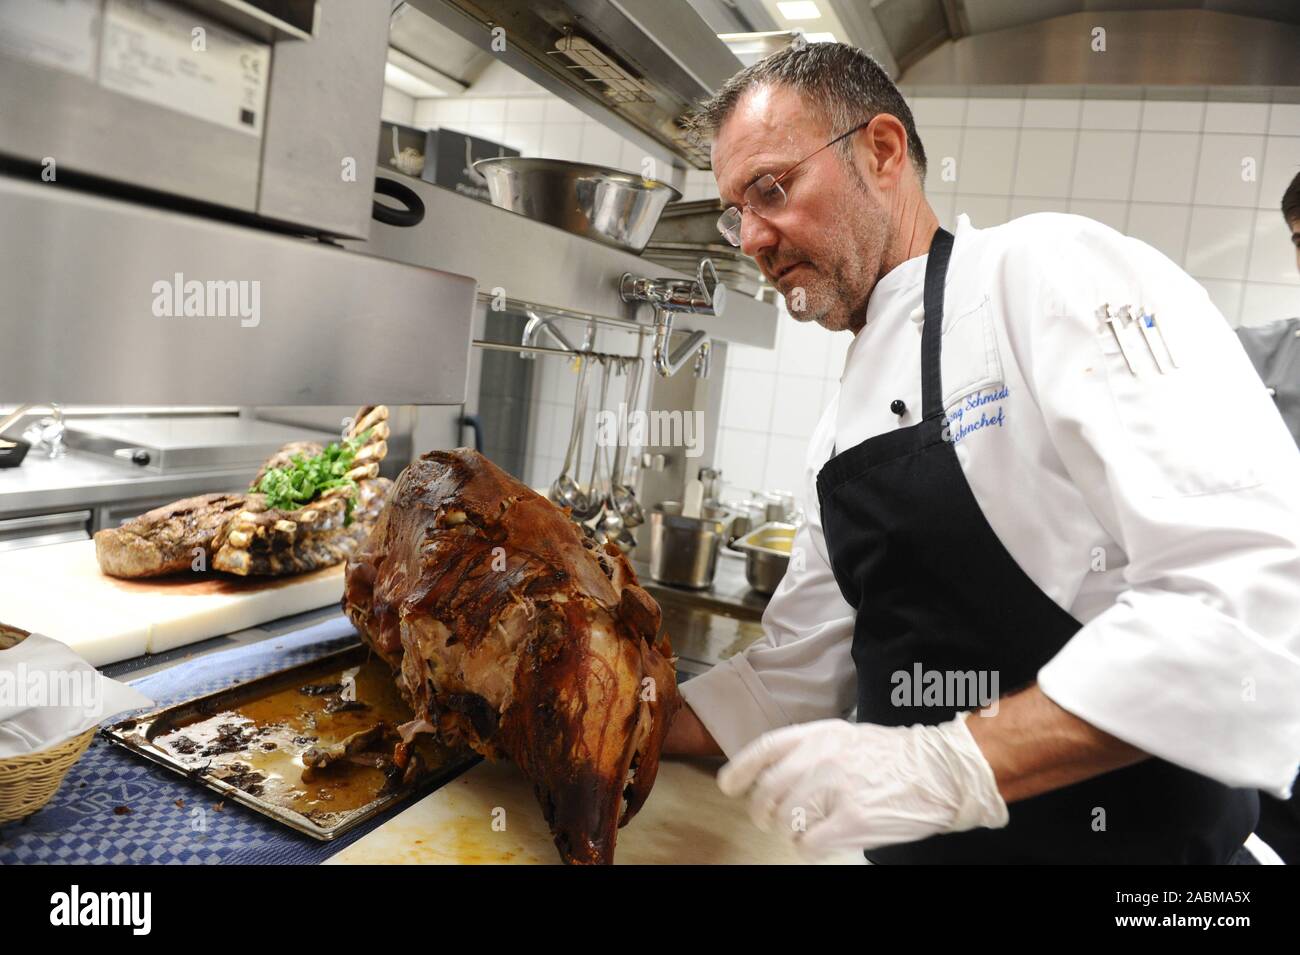 'Wirtshaus live': Chef Wolfgang Schmidt with a roasted Spanferkl in the kitchen of the restaurant 'Ayinger am Platzl'. [automated translation] Stock Photo